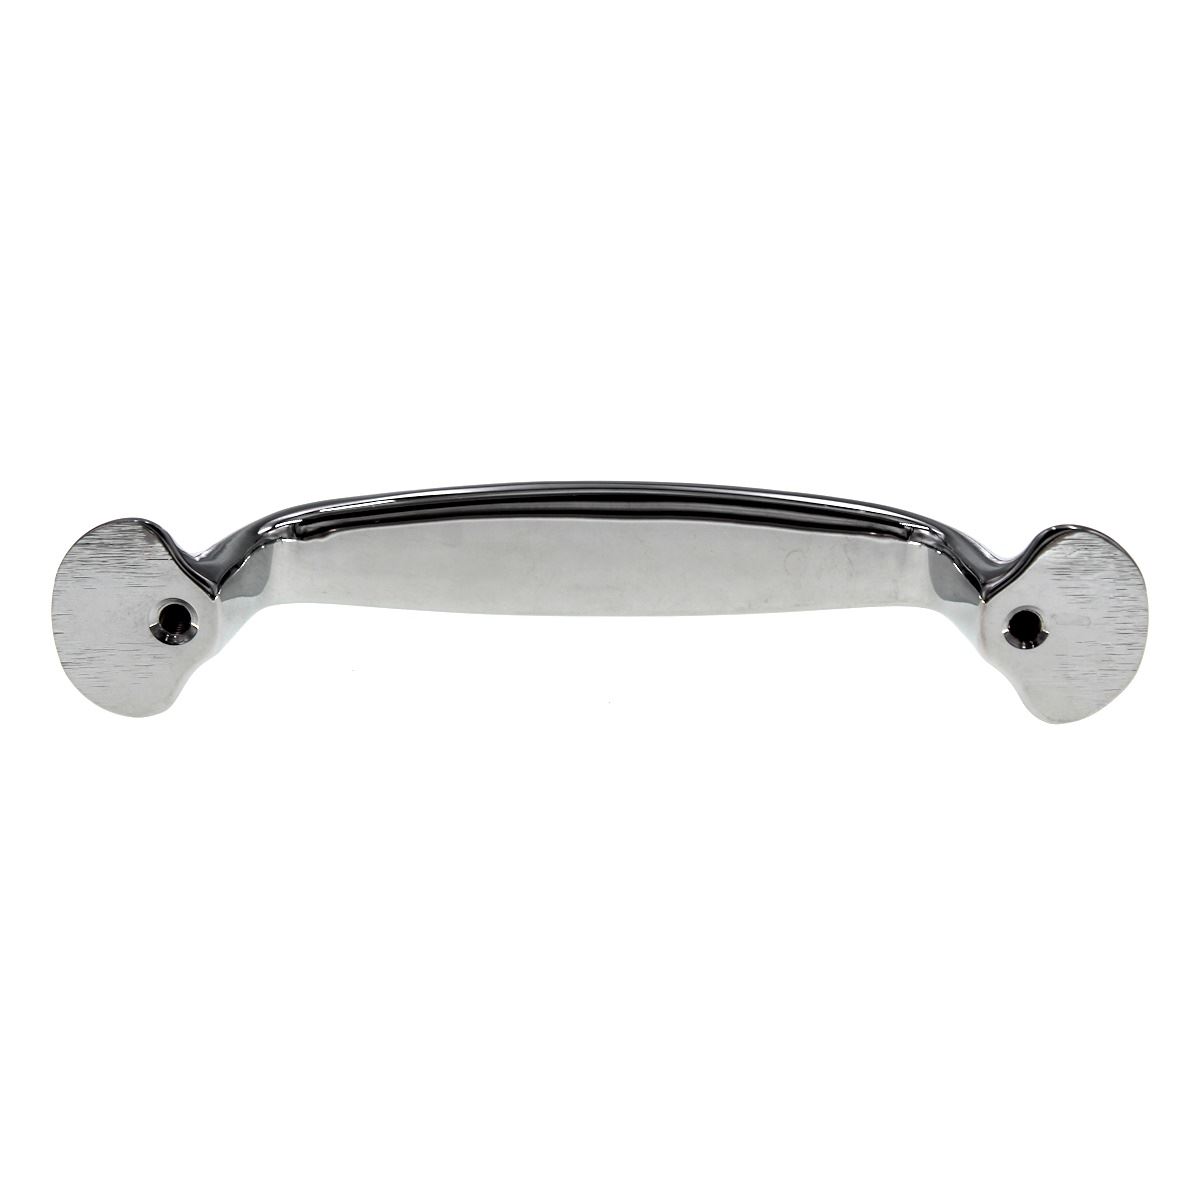 Schaub And Company Country Cabinet Arch Pull 4" Ctr Polished Chrome 742-26